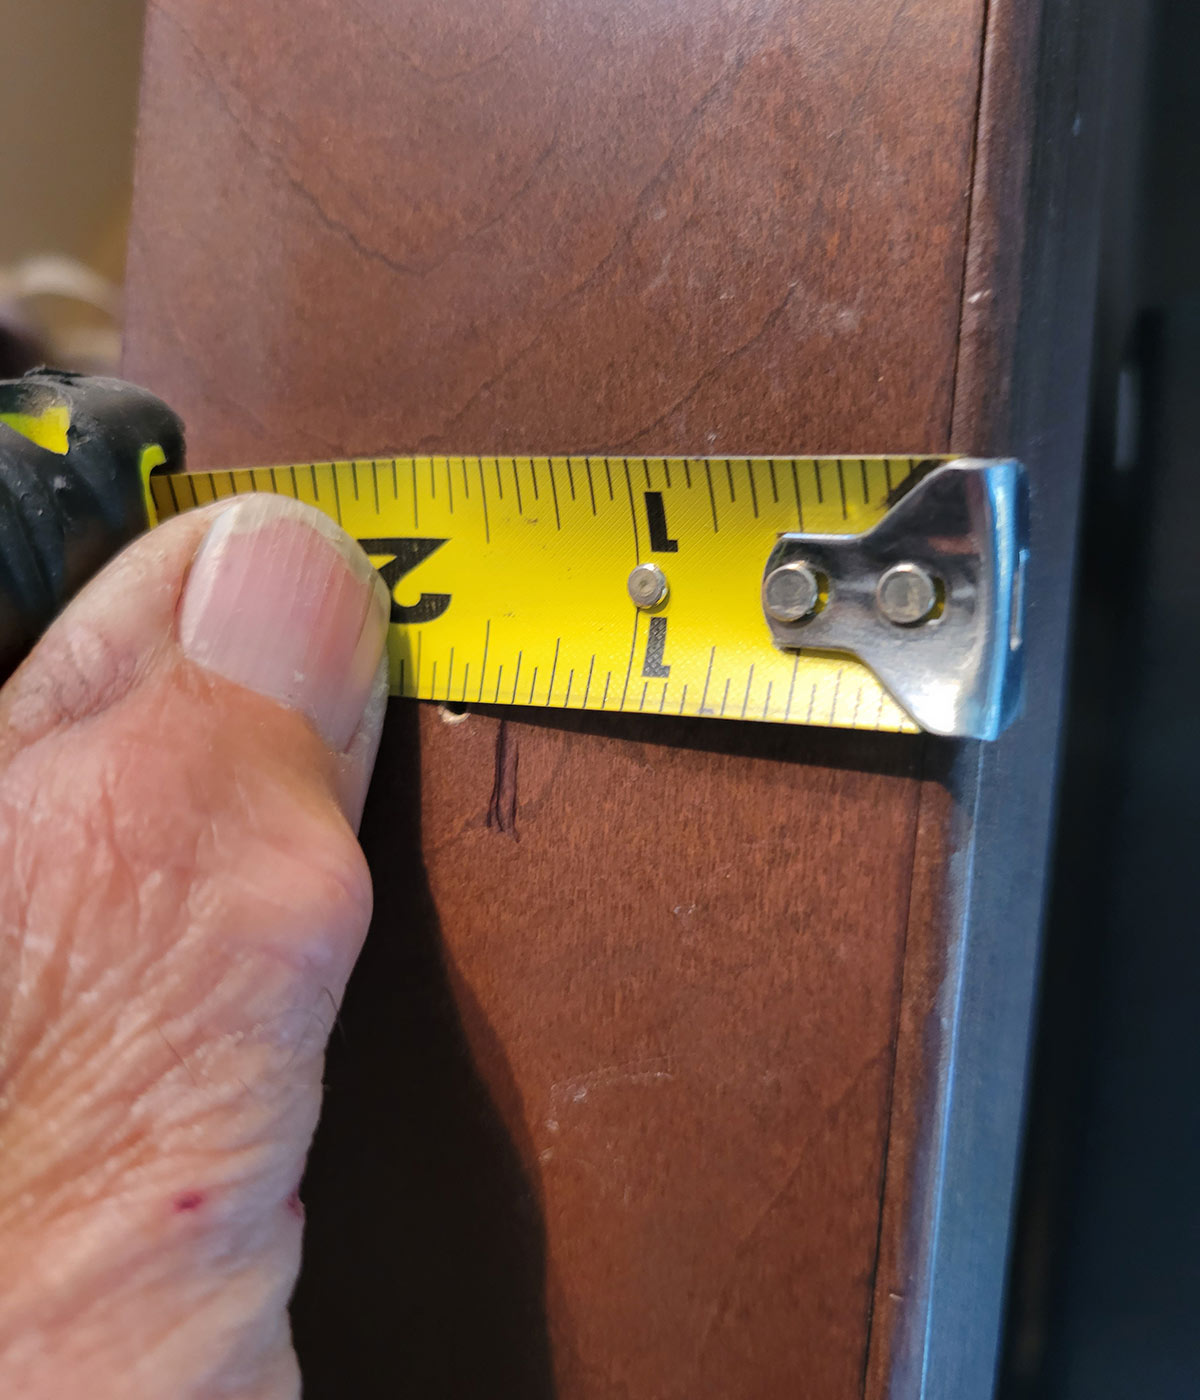 using a measuring tape, measurements are taken to locate the mounting of the magnetic catches